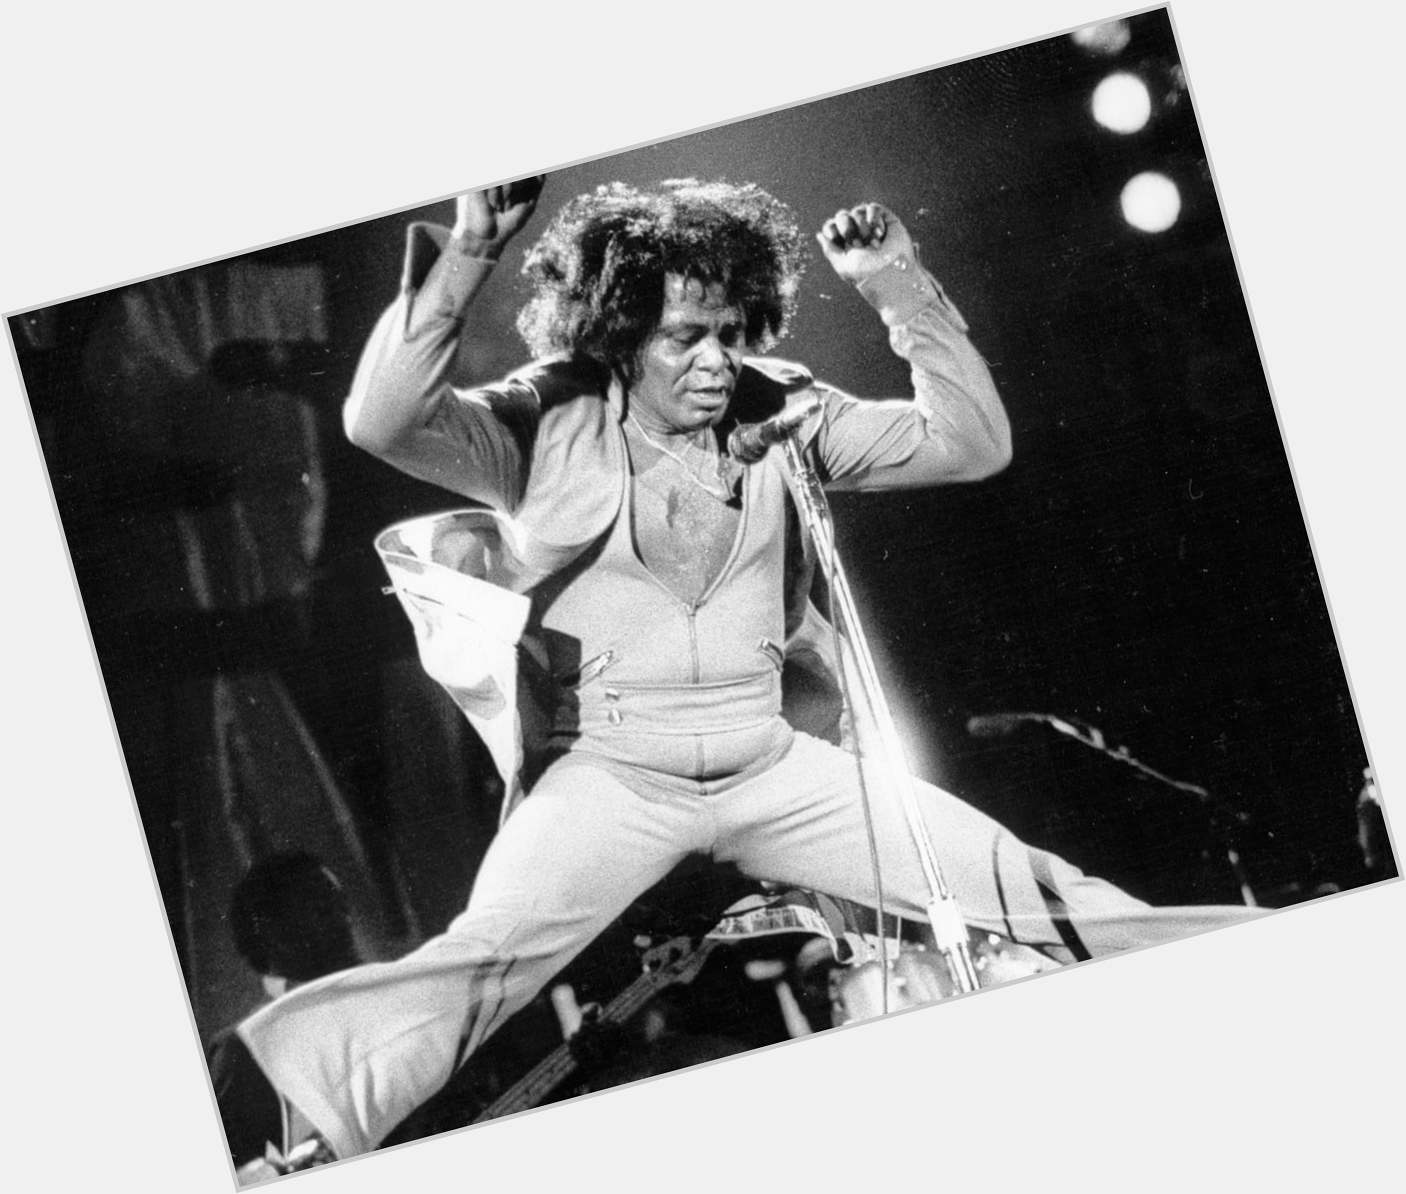 Happy Birthday to one of the greatest ever in James Brown 